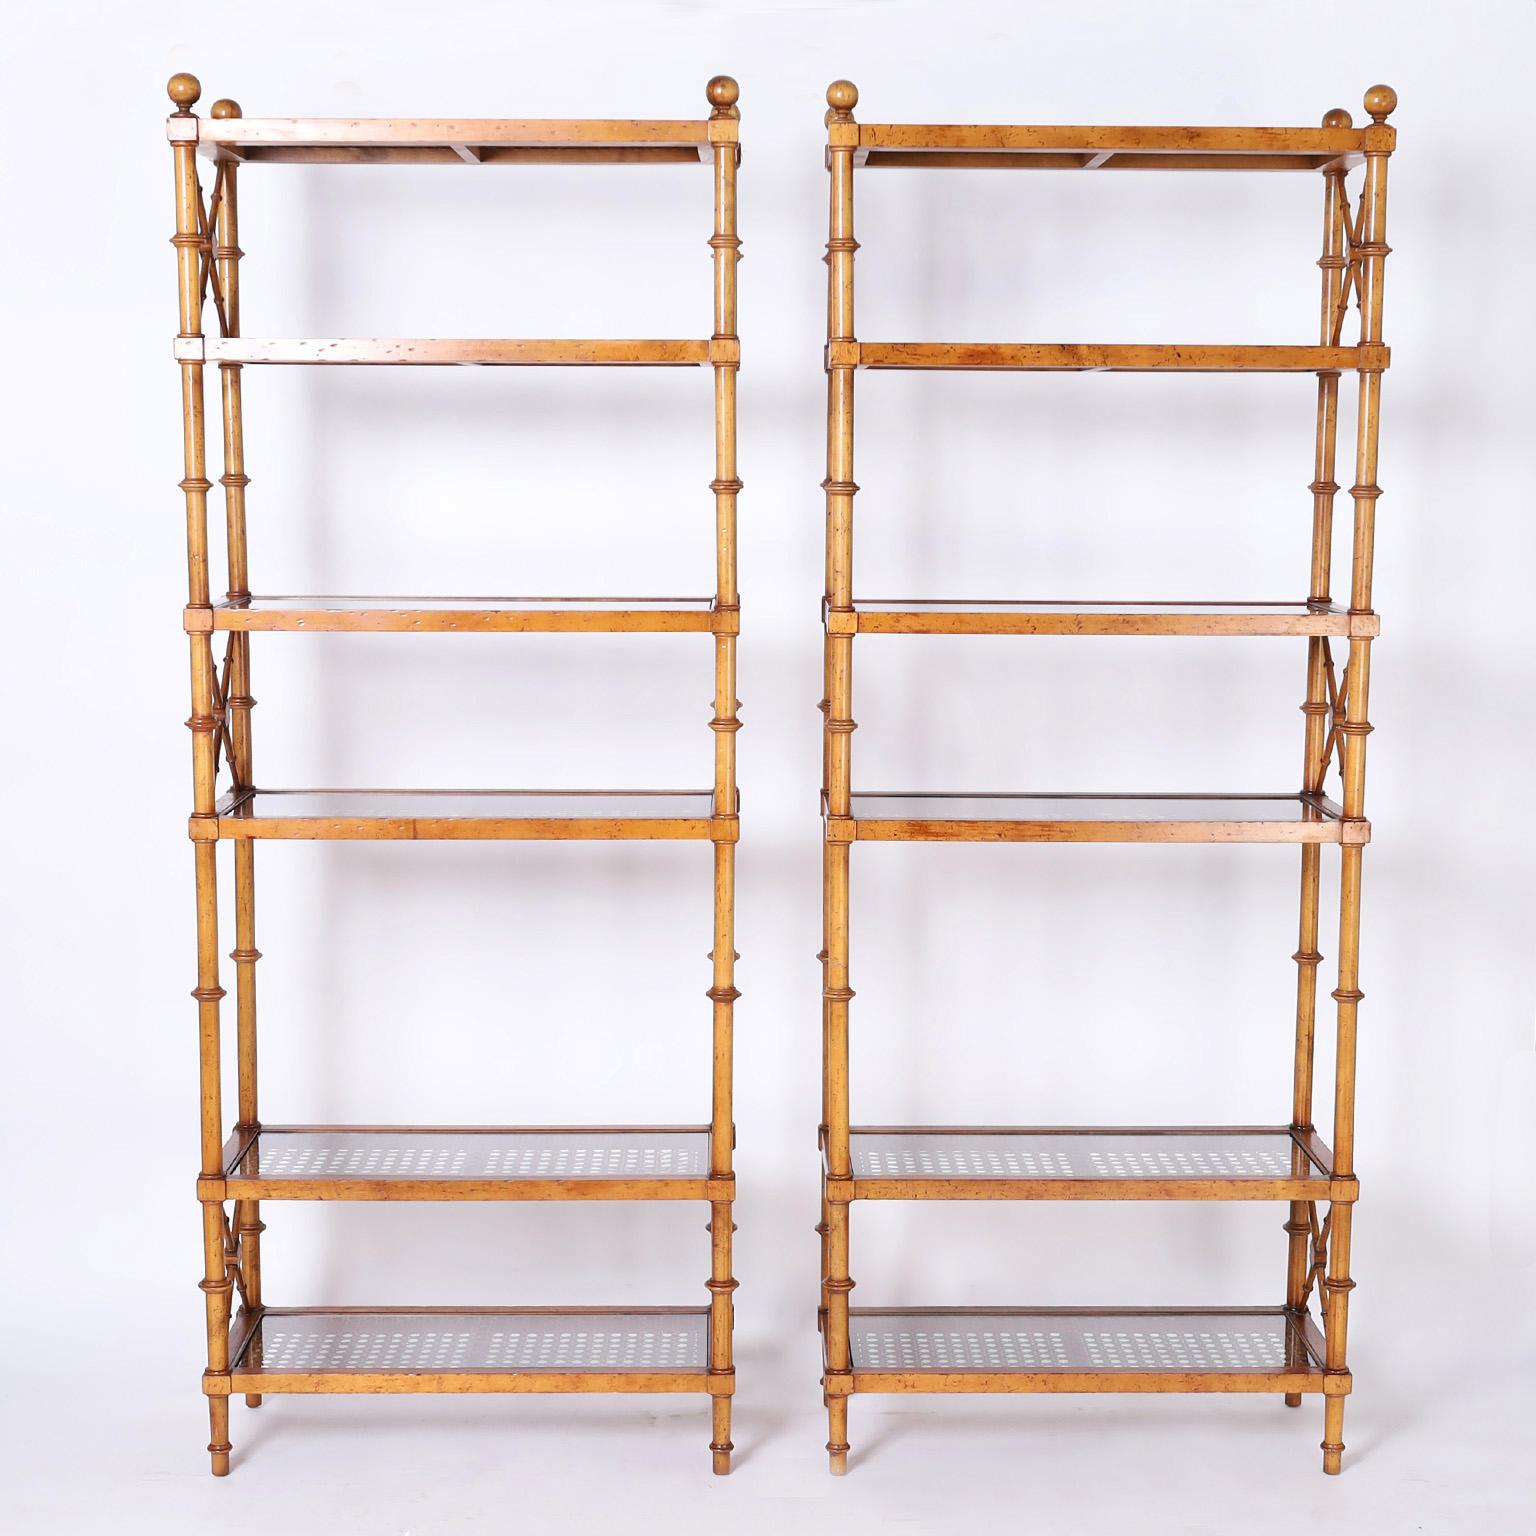 Pair of tall mid century etageres crafted in walnut with a desirable slim profile in classic form with contrived aging. The six shelves are caned under glass.